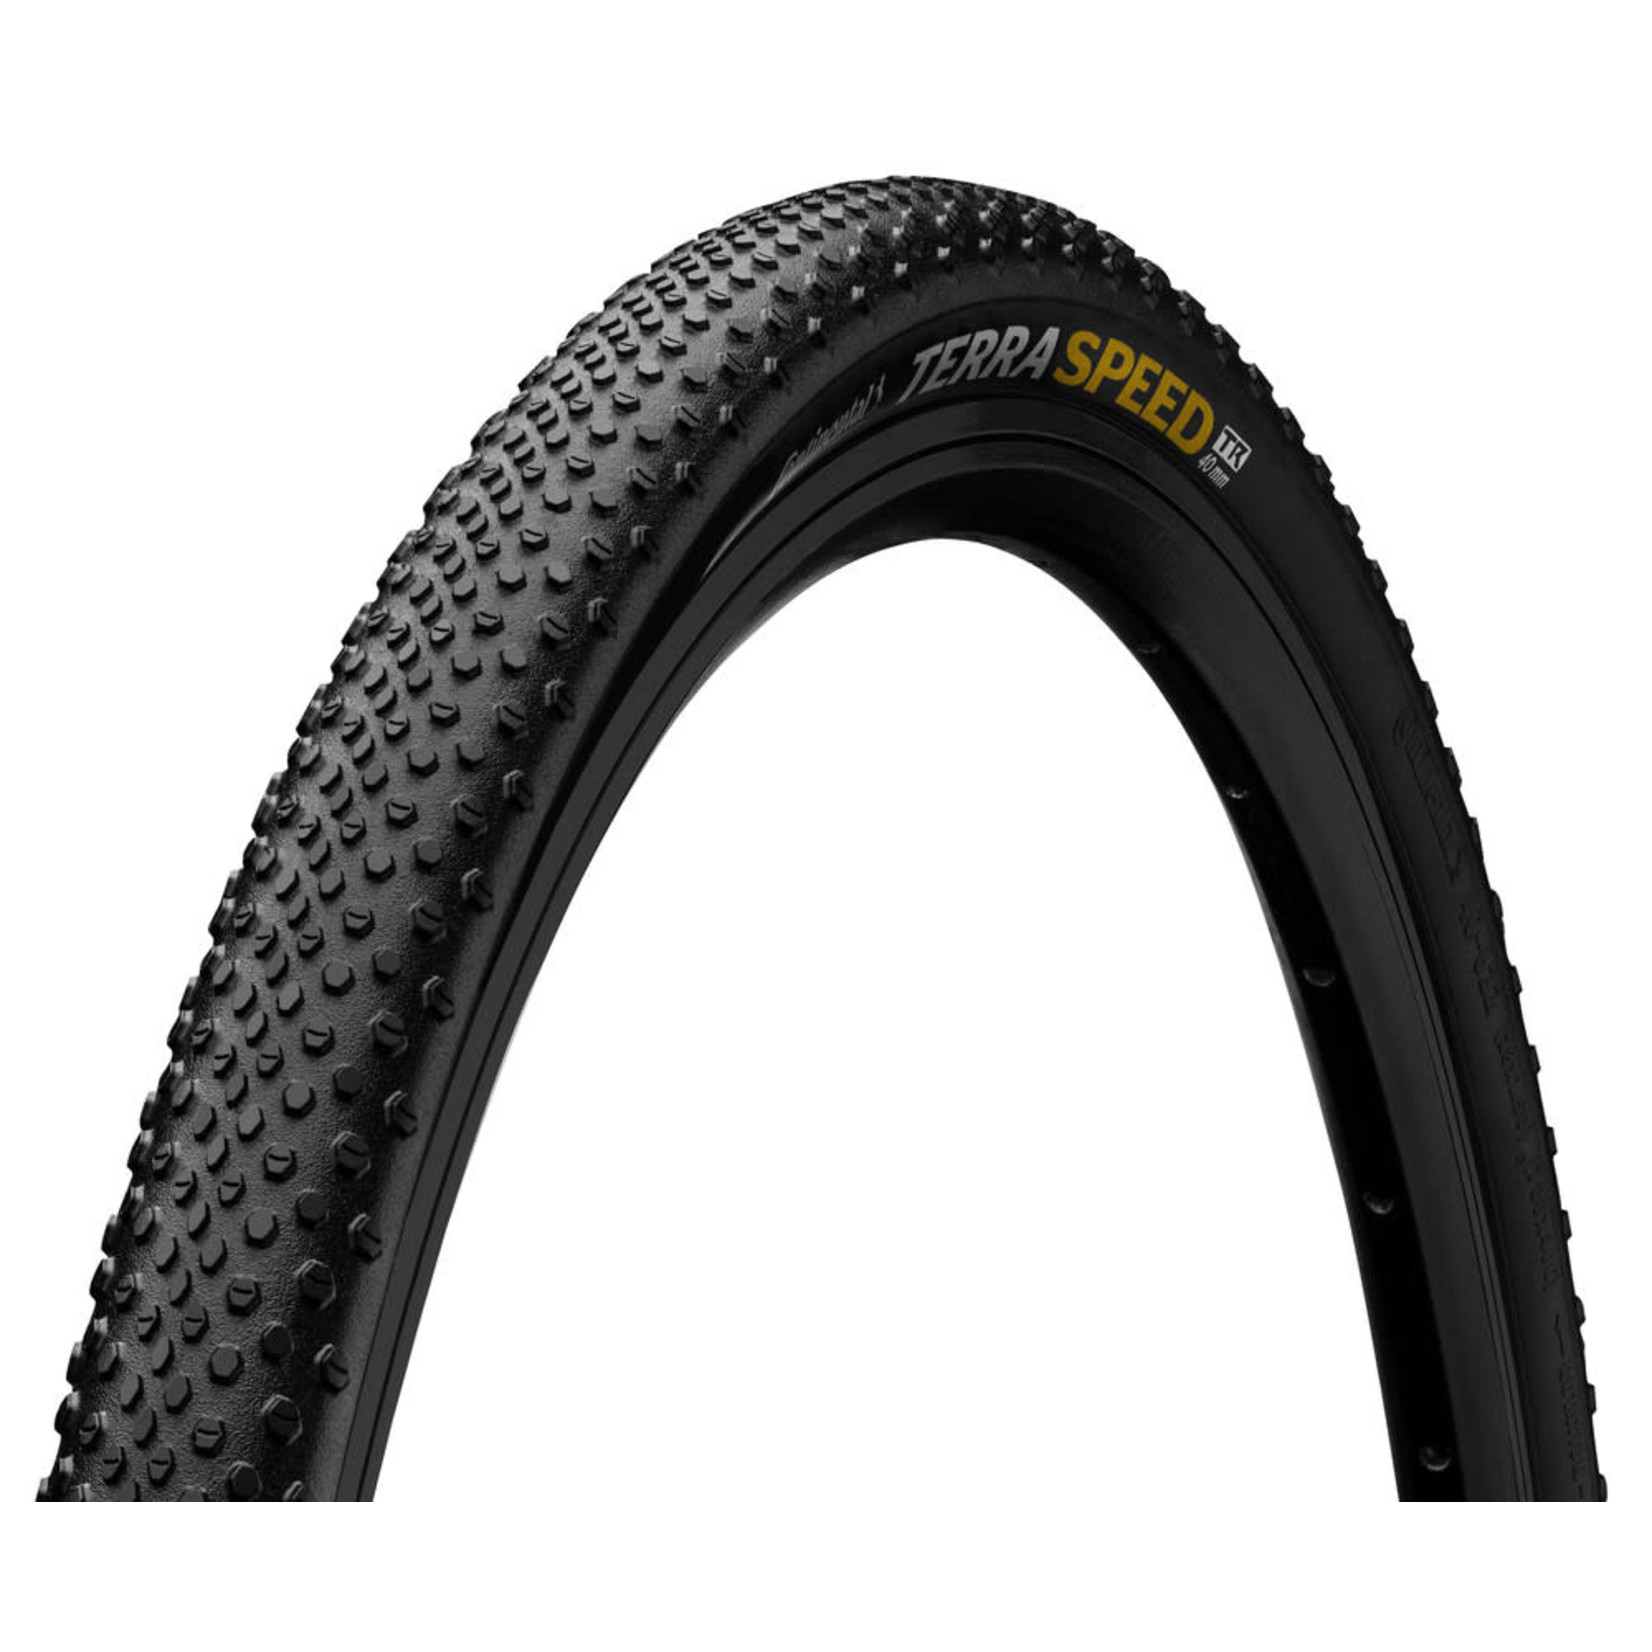 Continental Continental Terra Speed Protection Fold Bead Tire, 700x40c